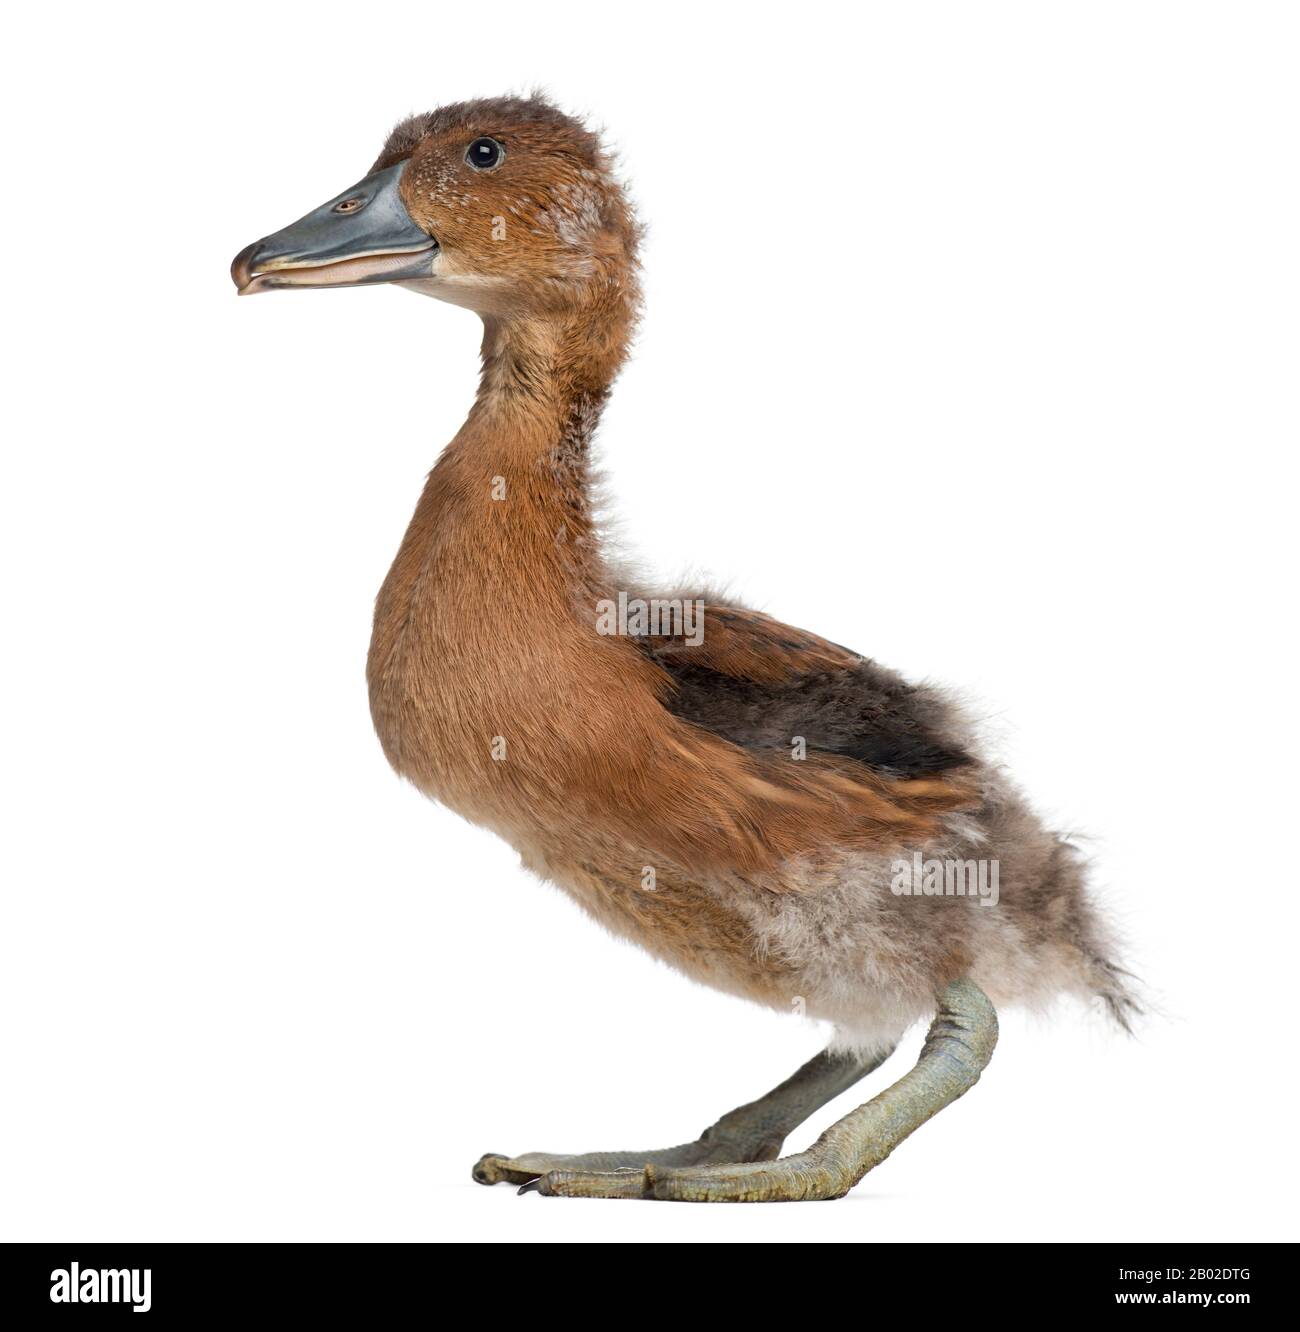 Side view of a Fulvous Whistling Duck, Dendrocygna bicolor, 32 days, isolated on white Stock Photo